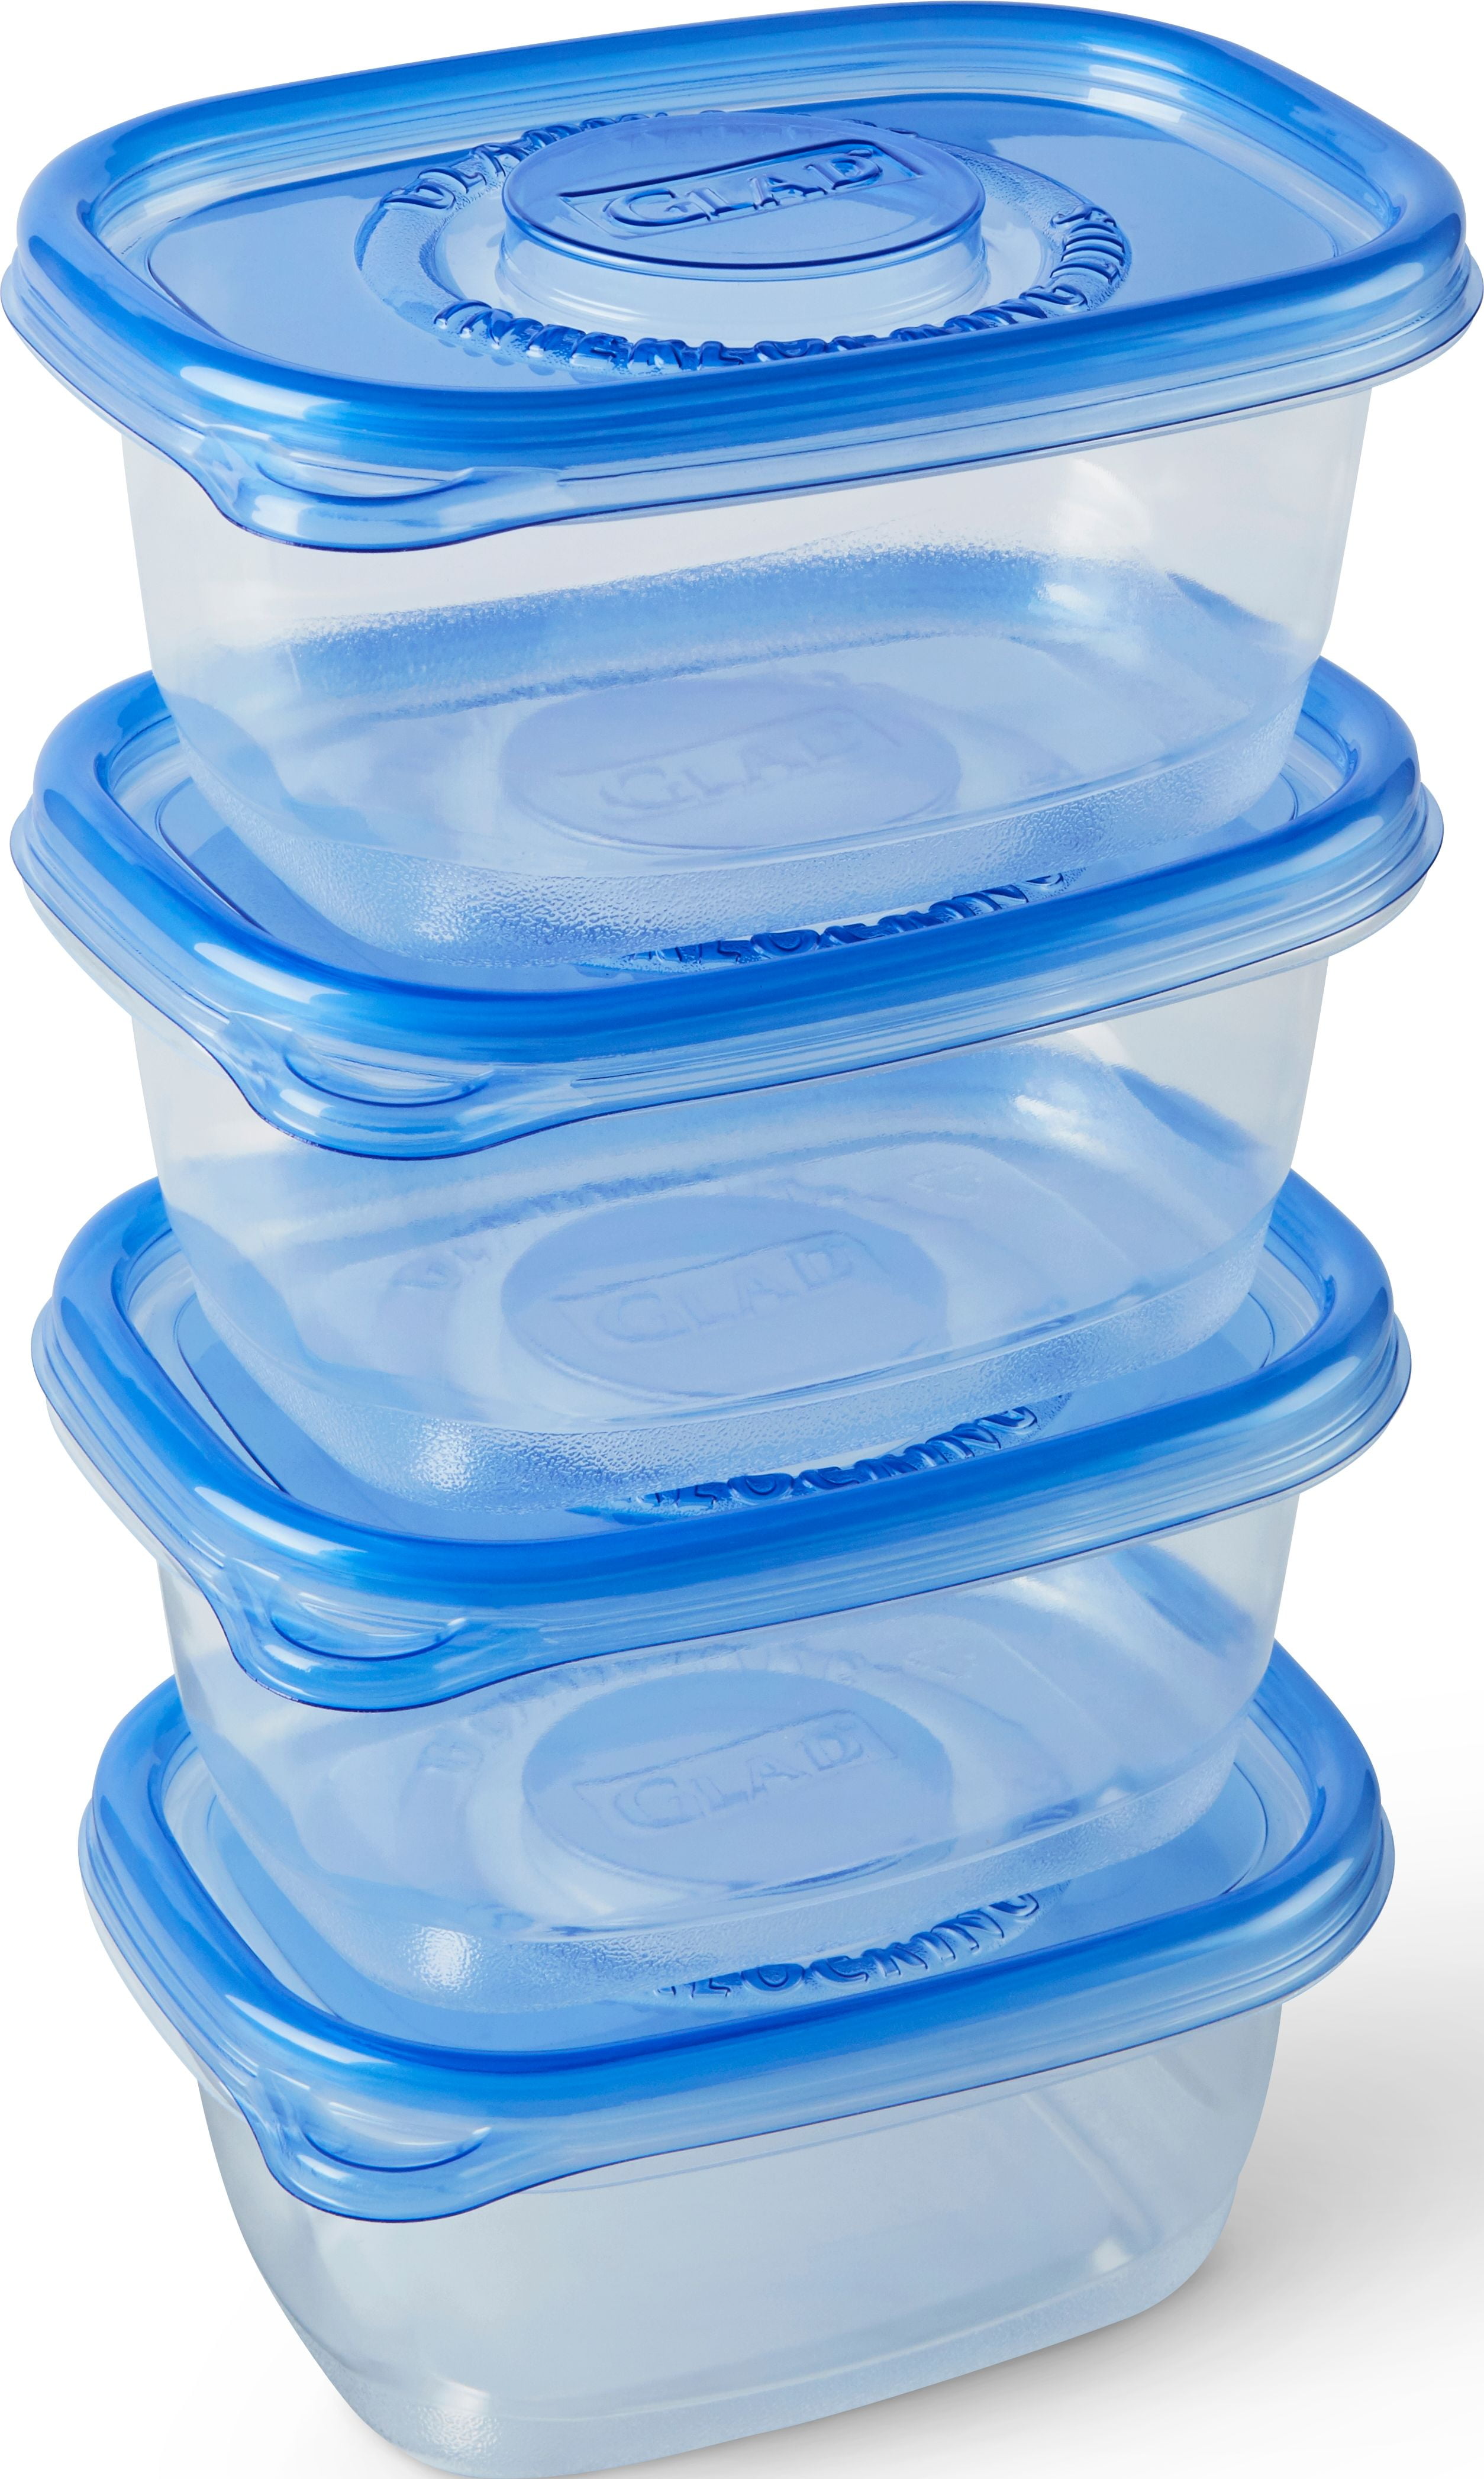 Glad to Go Snack 24 oz Containers - 4 pack